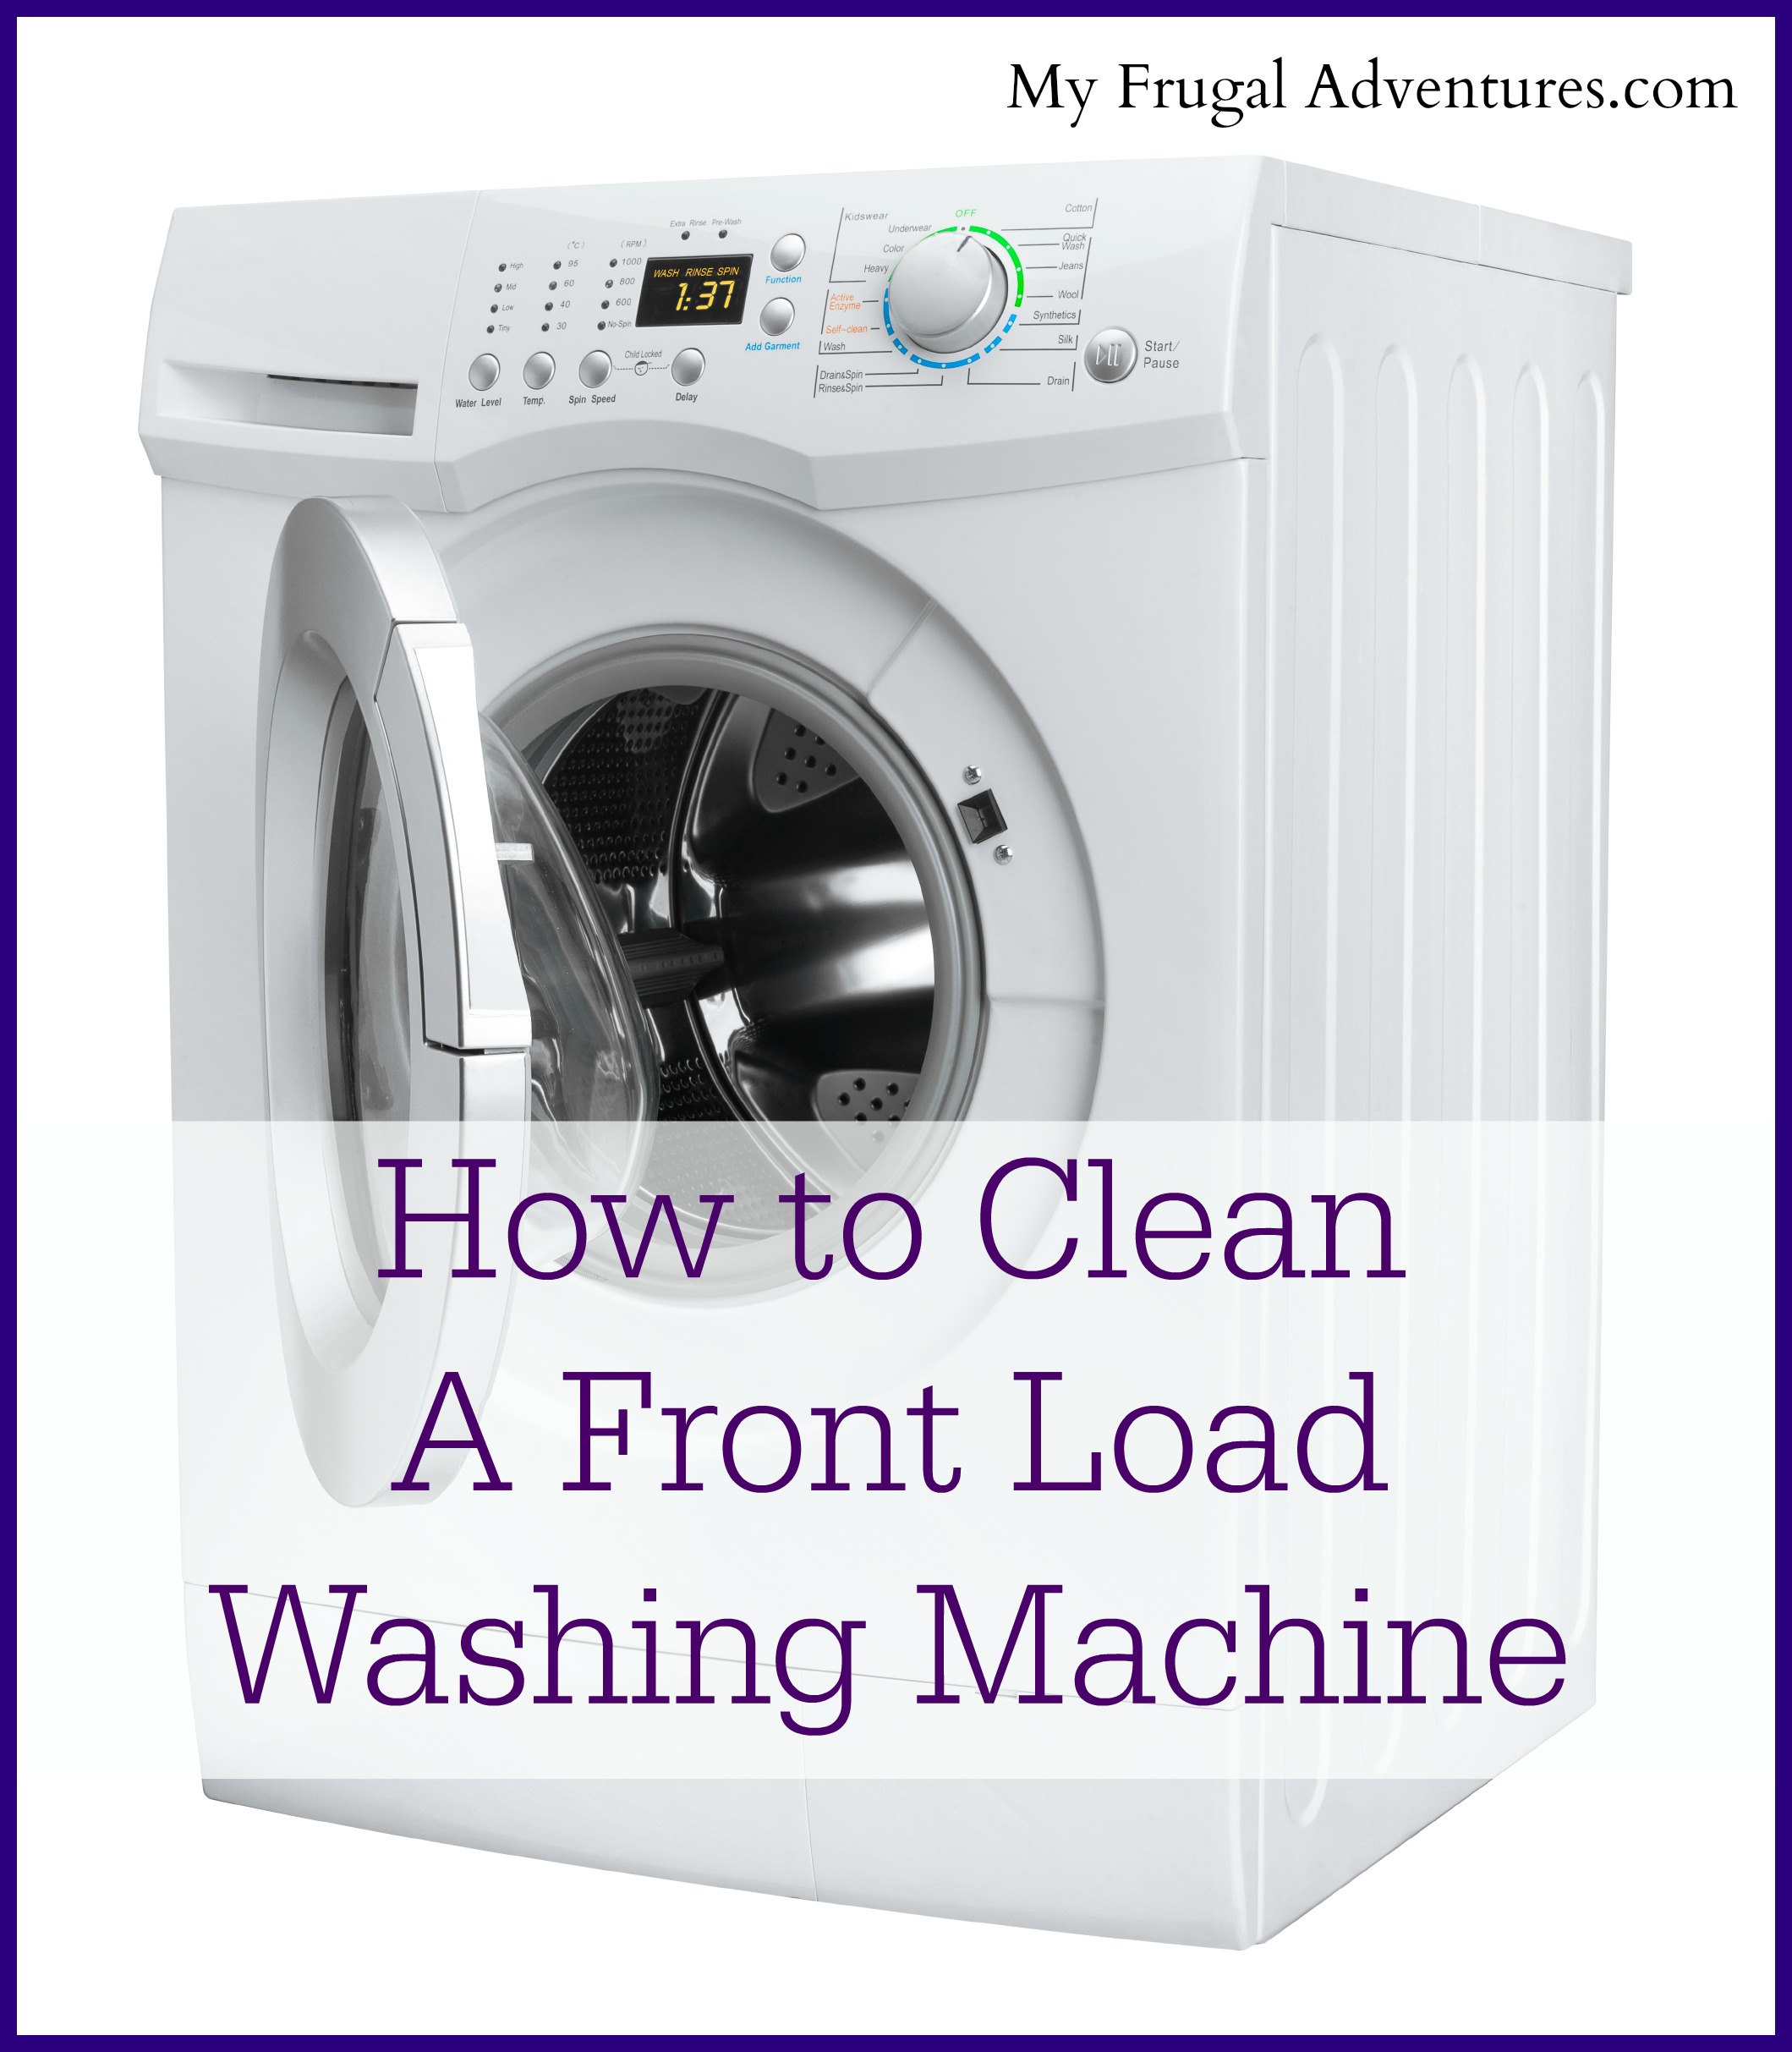 7 Tips on How to Clean a Front Load Washer